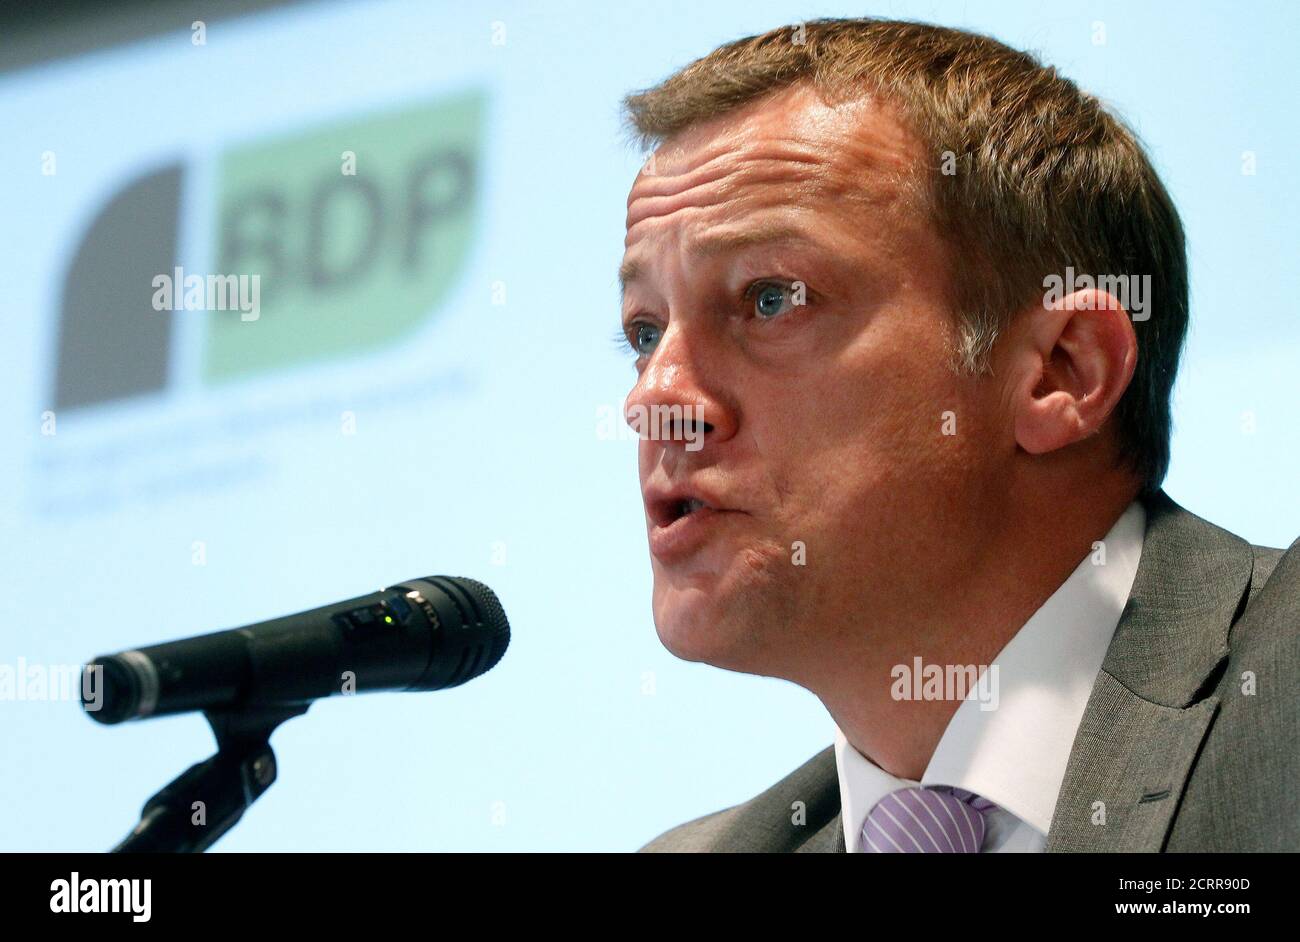 Martin Landolt, newly elected president of the Swiss Buergerlich Demokratische Partei (BDP) addresses a party meeting in the Swiss town of Glarus May 5, 2012.  REUTERS/Arnd Wiegmann (SWITZERLAND - Tags: POLITICS) Stock Photo